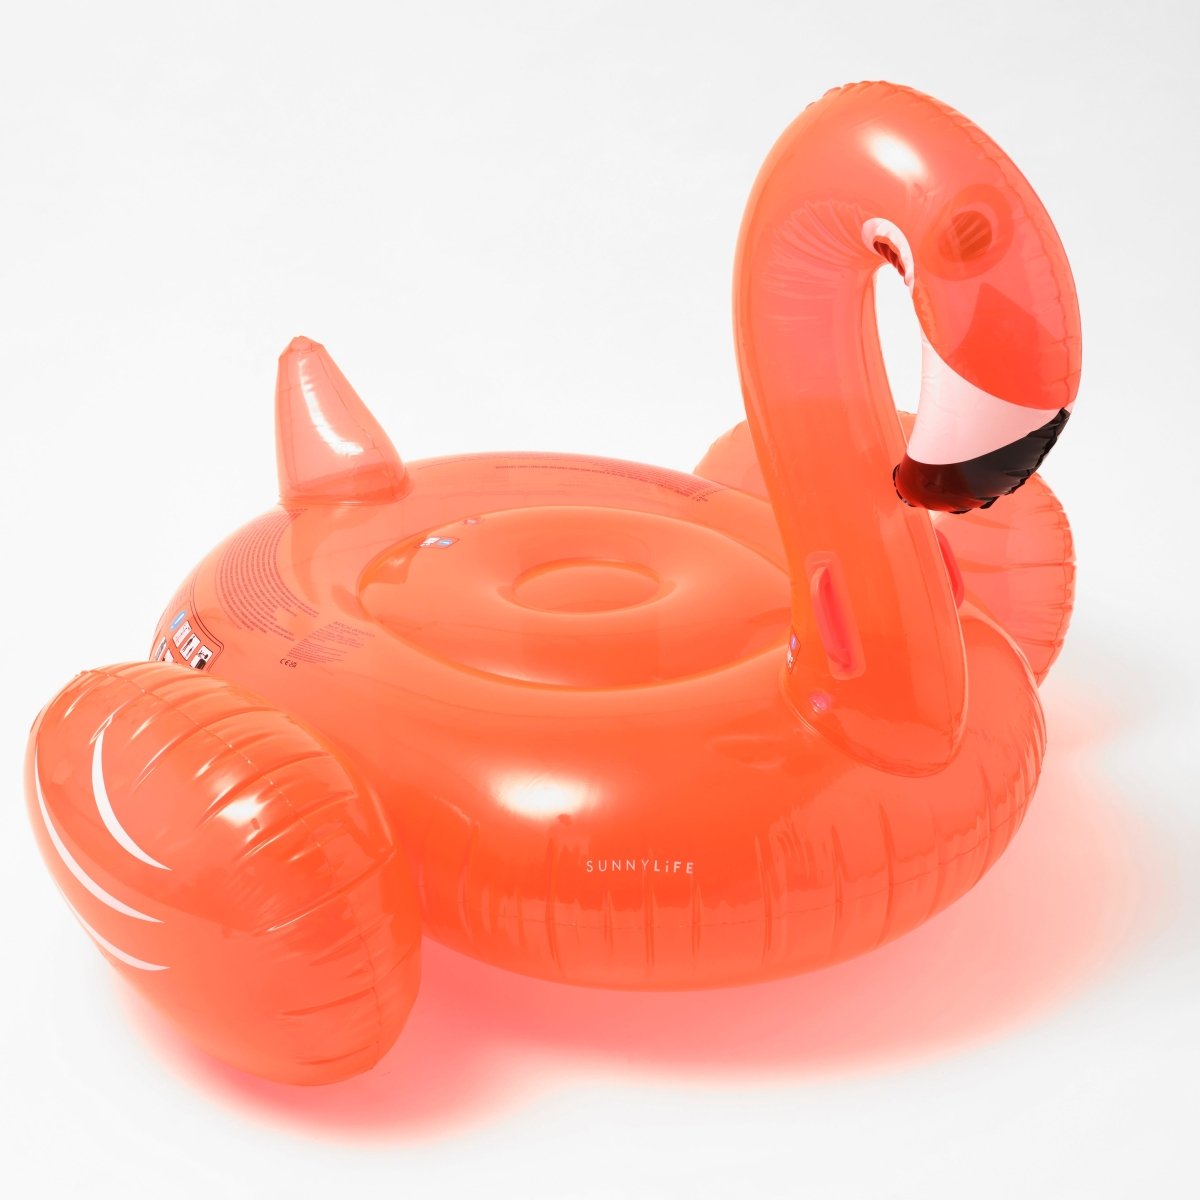 SUNNYLiFE Neon Color Inflatable Flamingo Luxe Ride-On Float Rosie Watermelon - S3LRIDNR